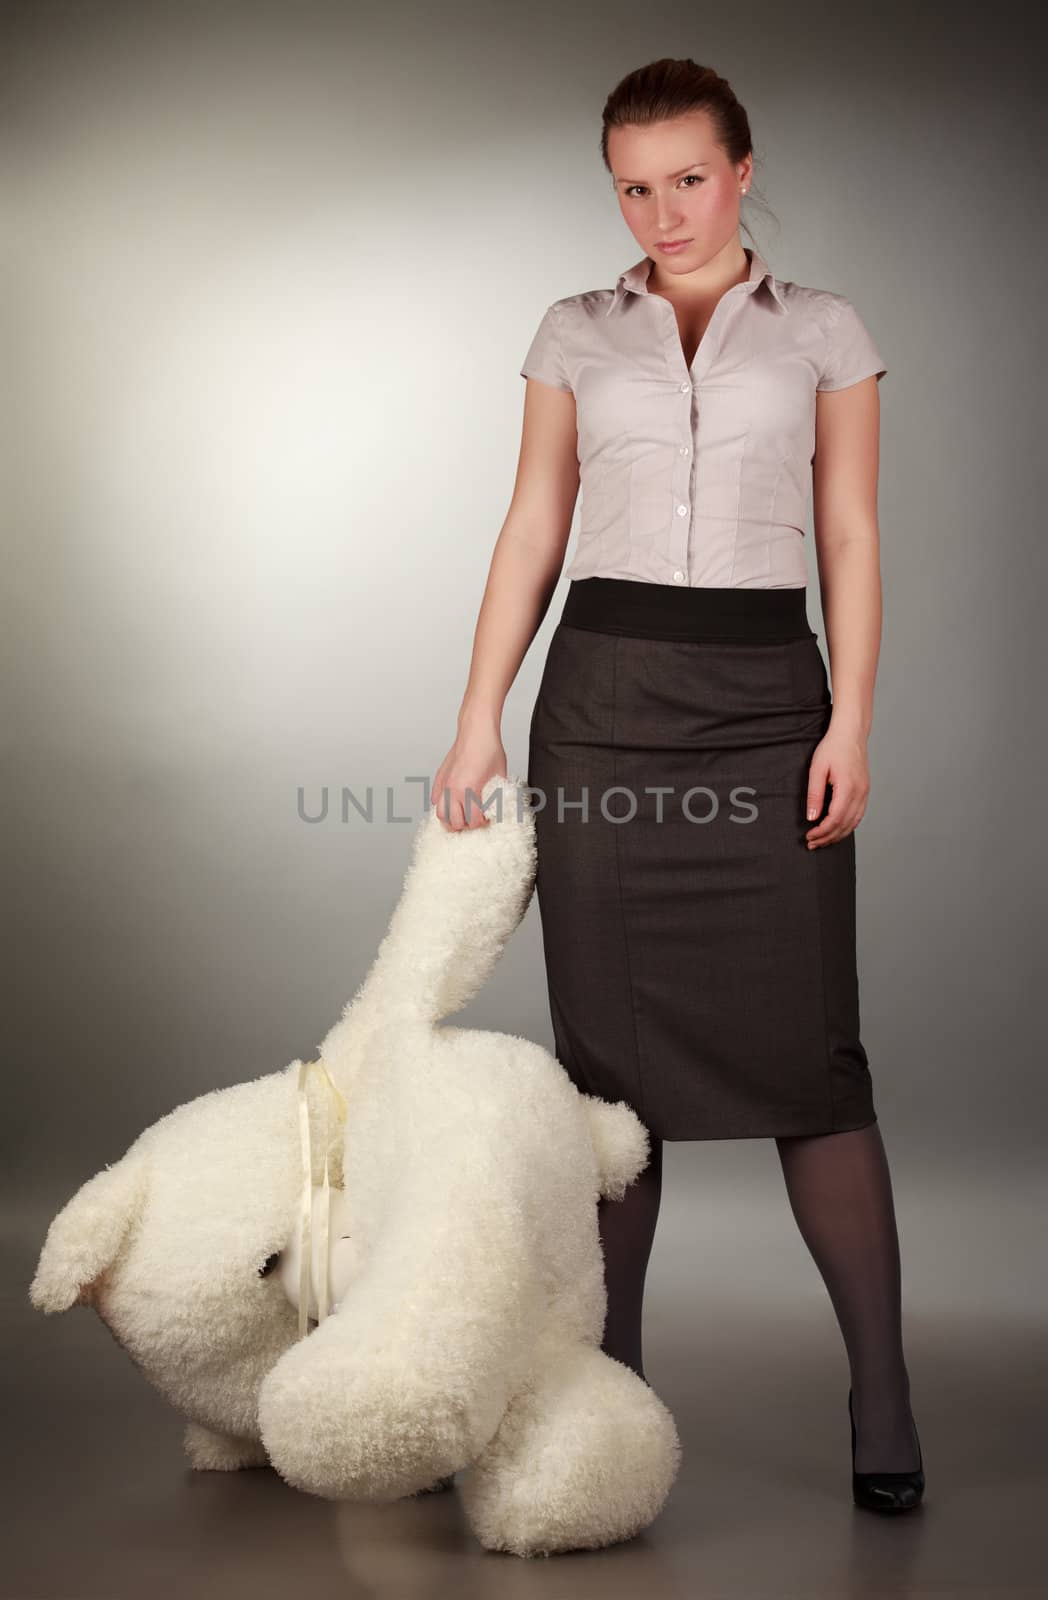 beautiful girl with toy bear, gray background